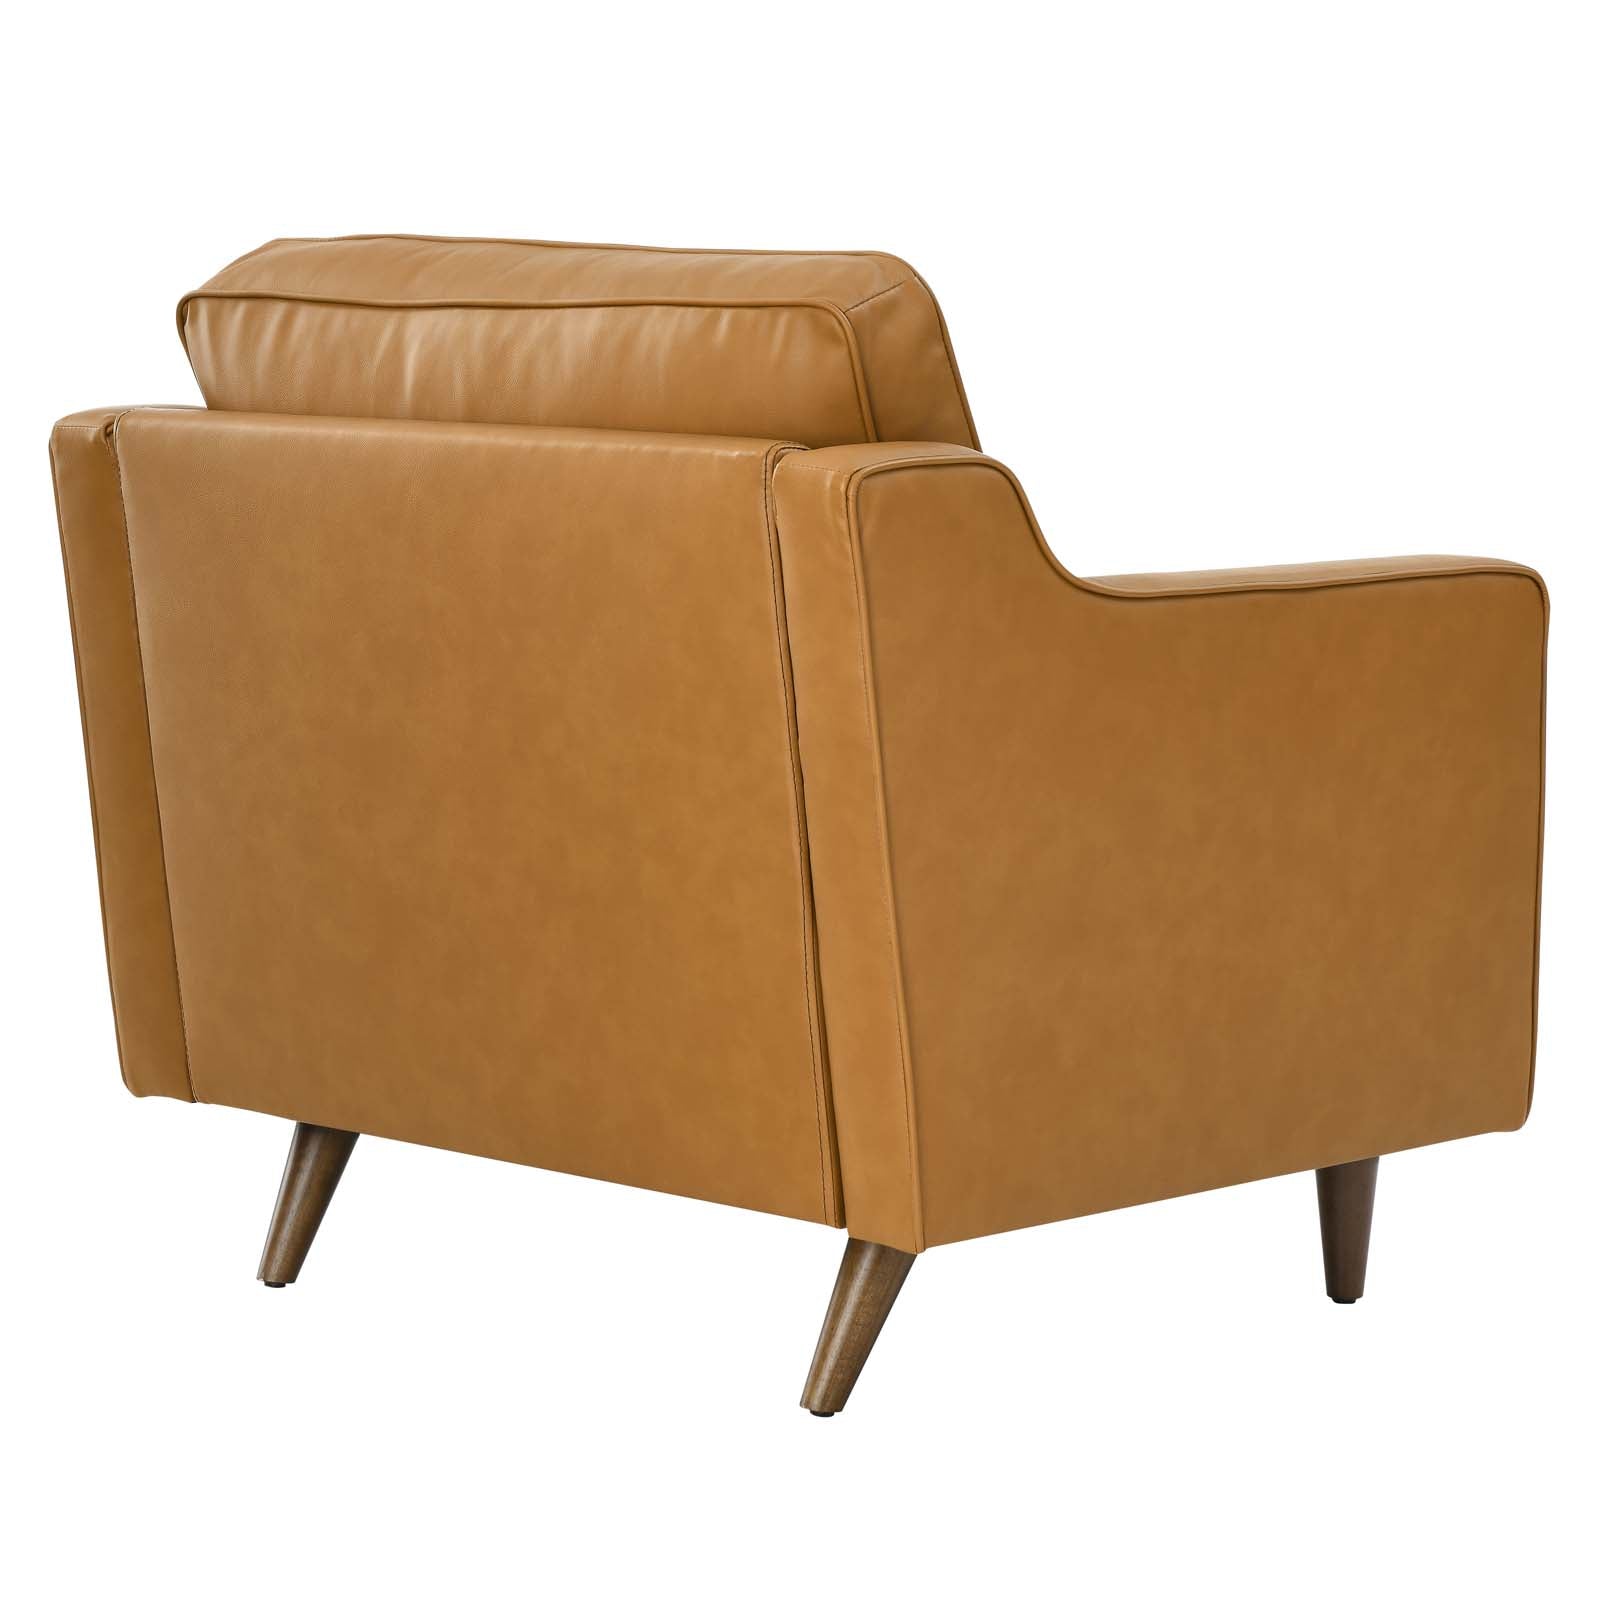 Modway Accent Chairs - Impart Genuine Leather Armchair Tan